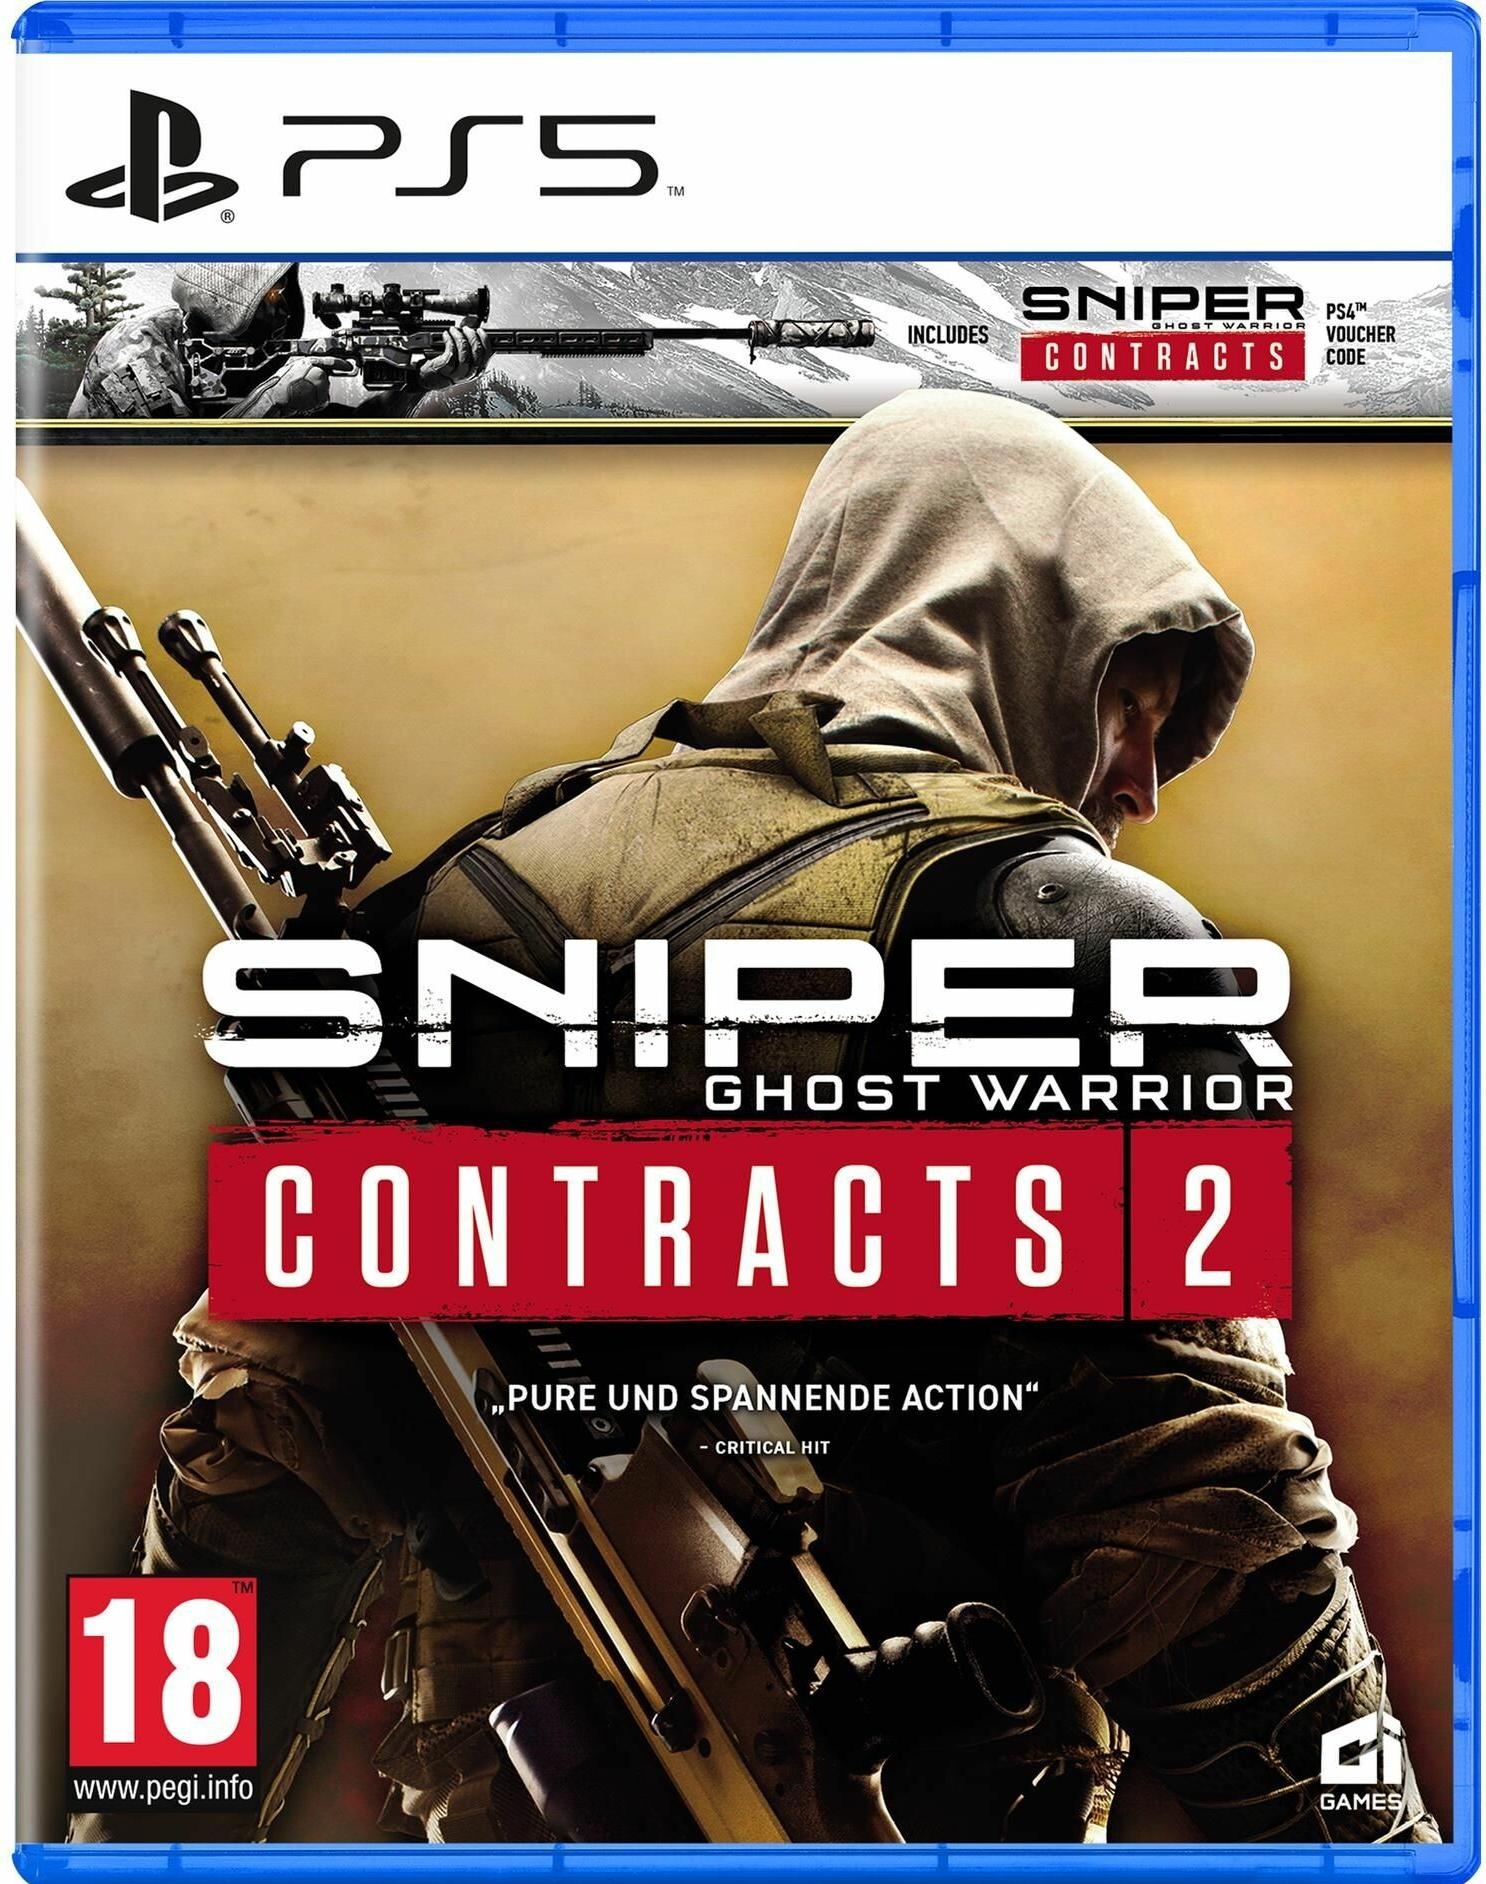 CI Games, Sniper Ghost Warrior Contracts 1 and 2 Double Pack